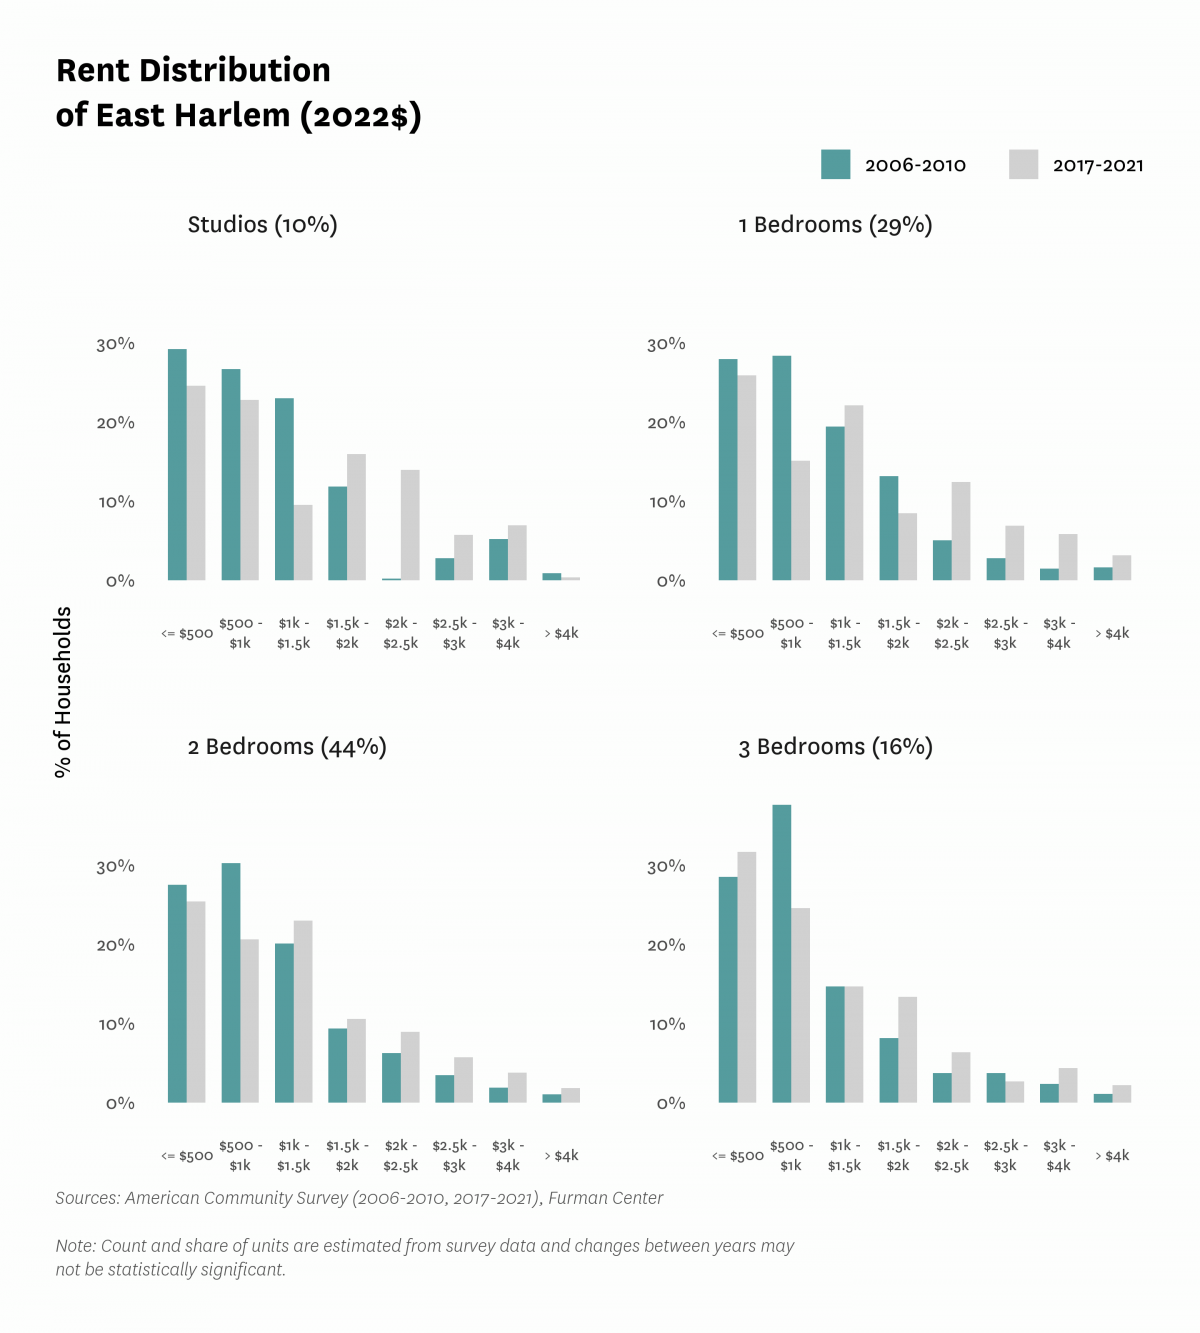 Graph showing the distribution of rents in East Harlem in both 2010 and 2017-2021.